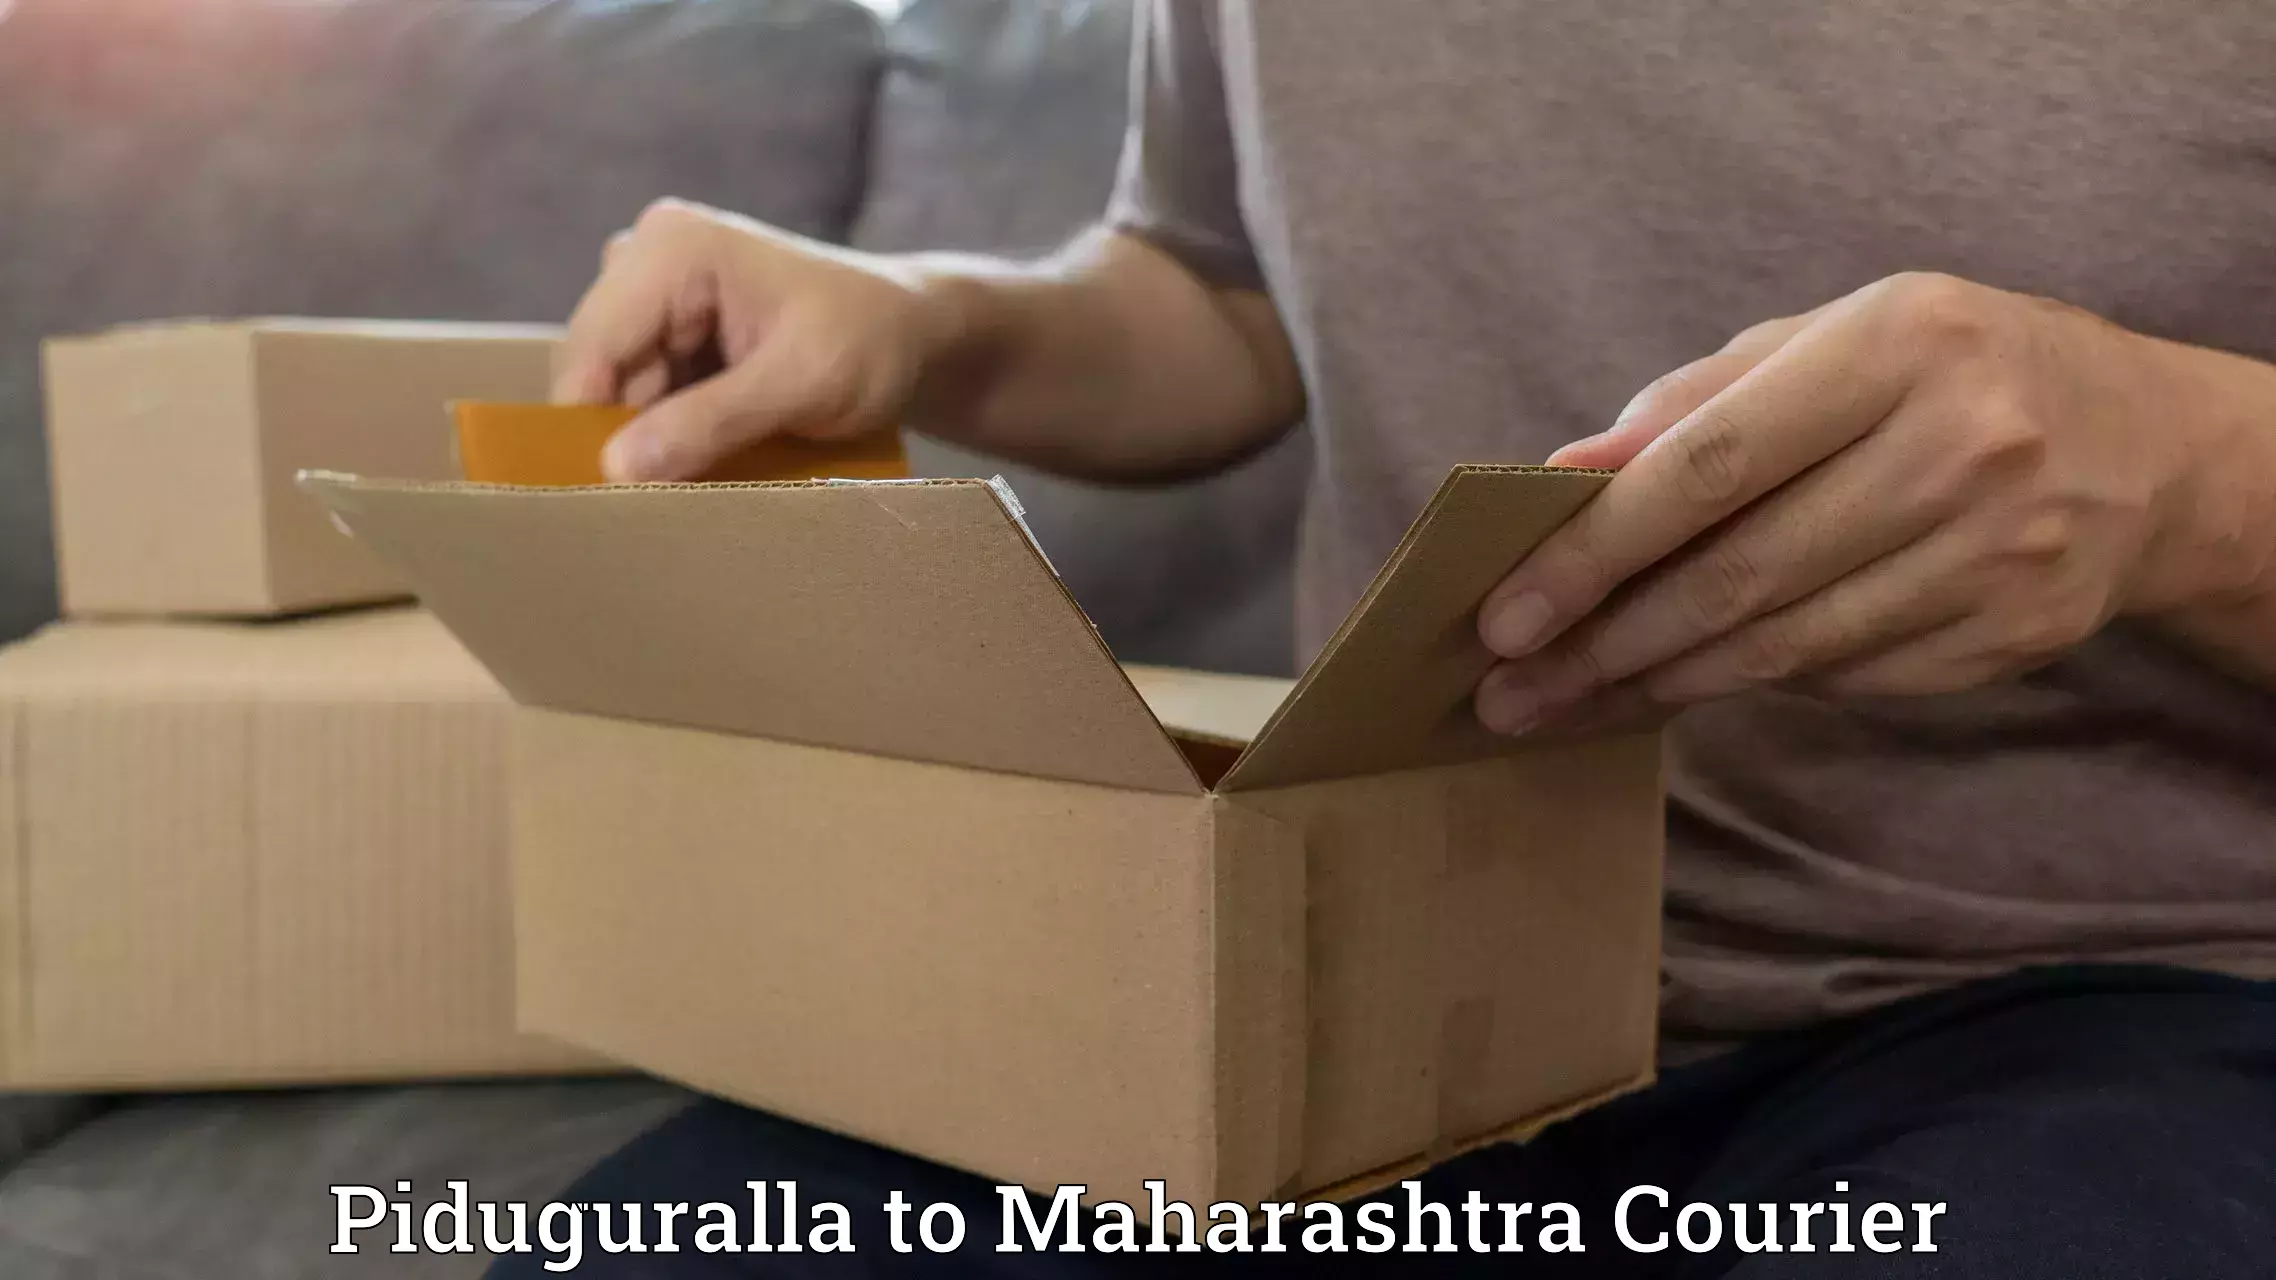 State-of-the-art courier technology Piduguralla to Ahmednagar